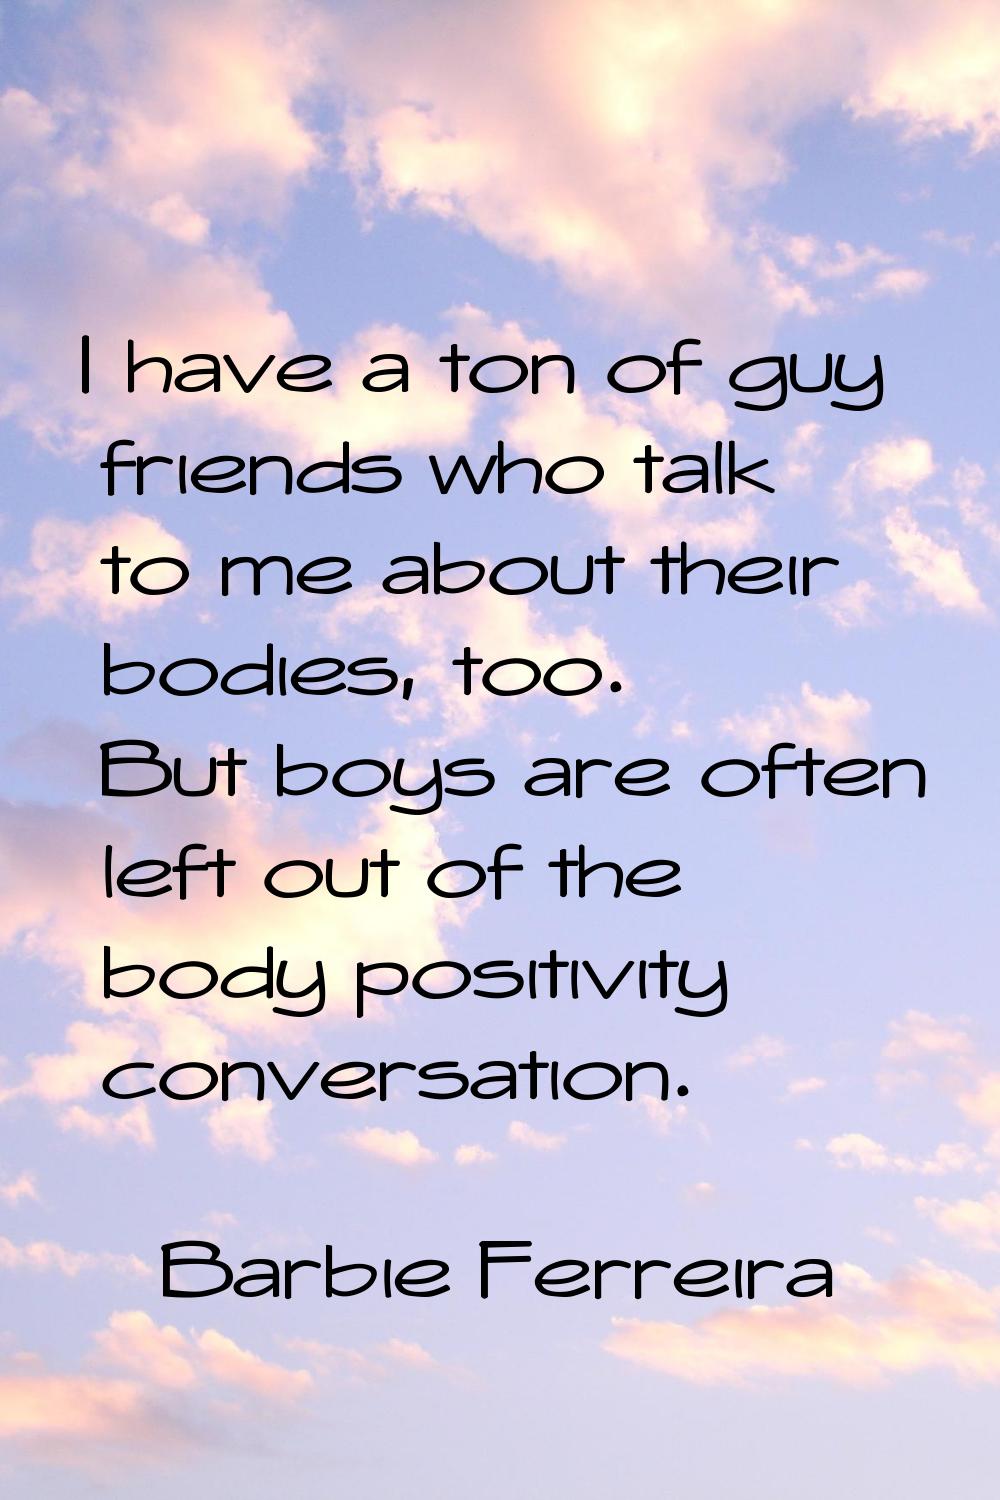 I have a ton of guy friends who talk to me about their bodies, too. But boys are often left out of 